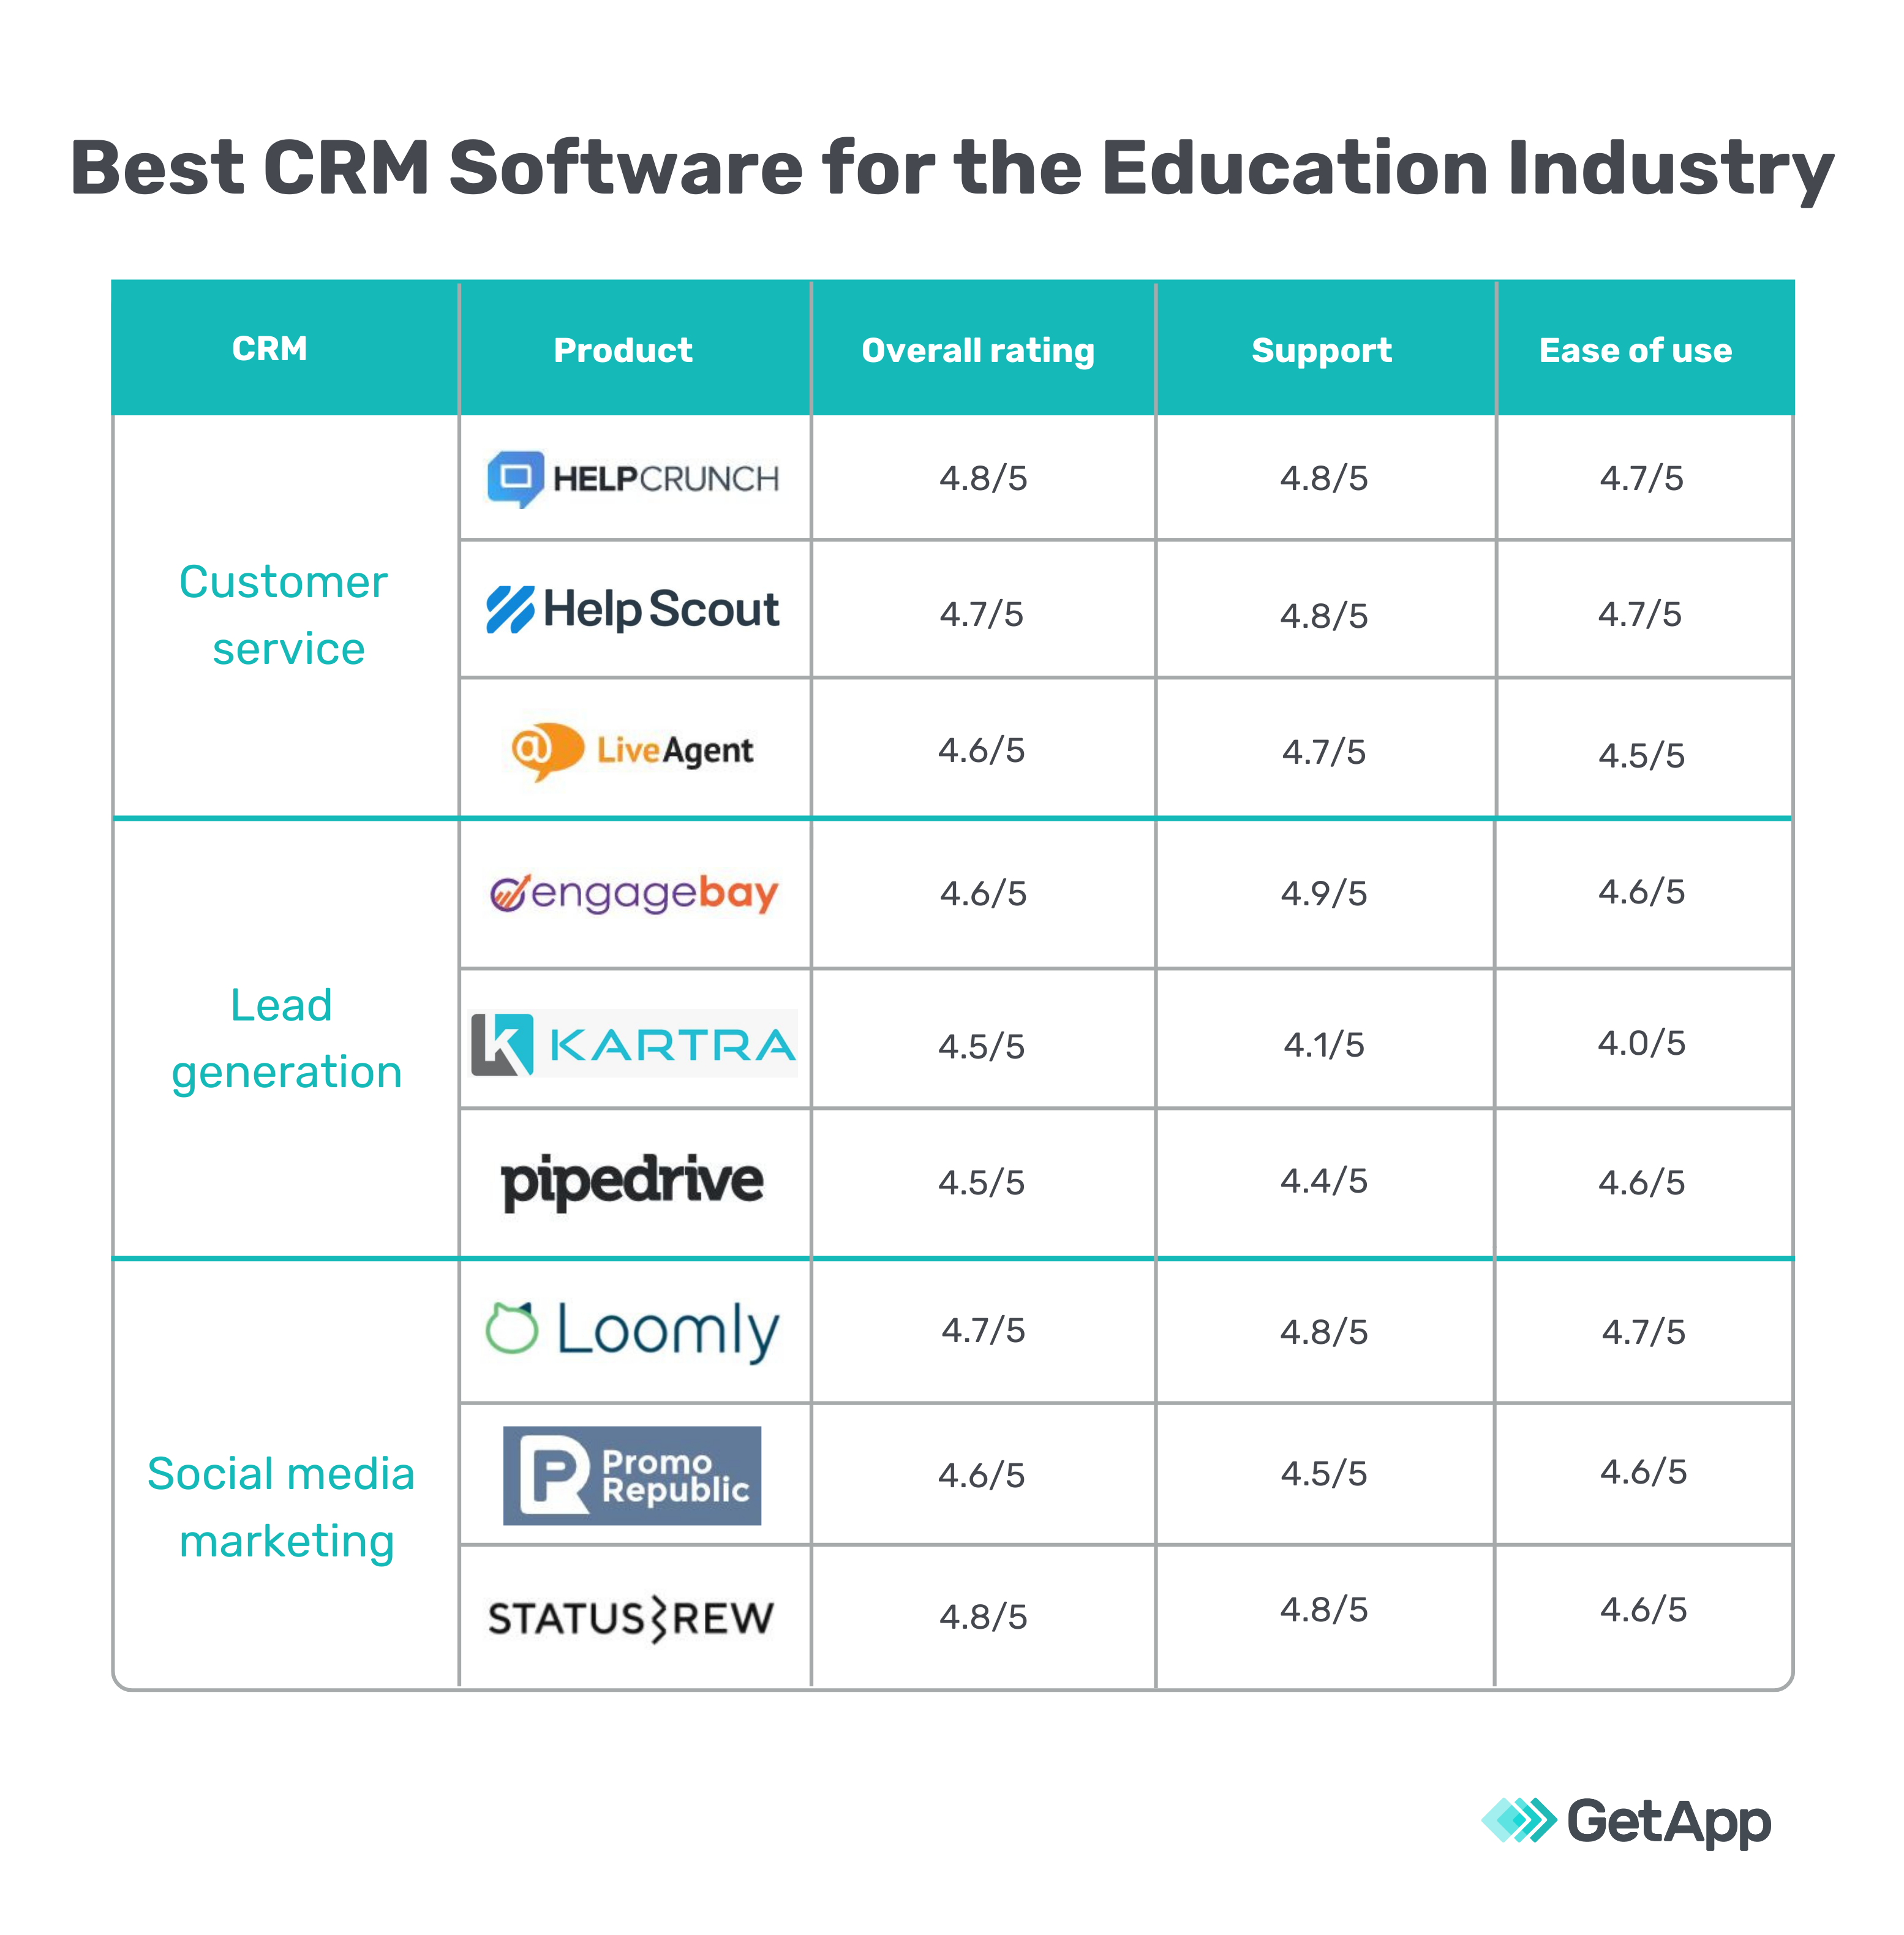 Best CRM Software for the Education Industry